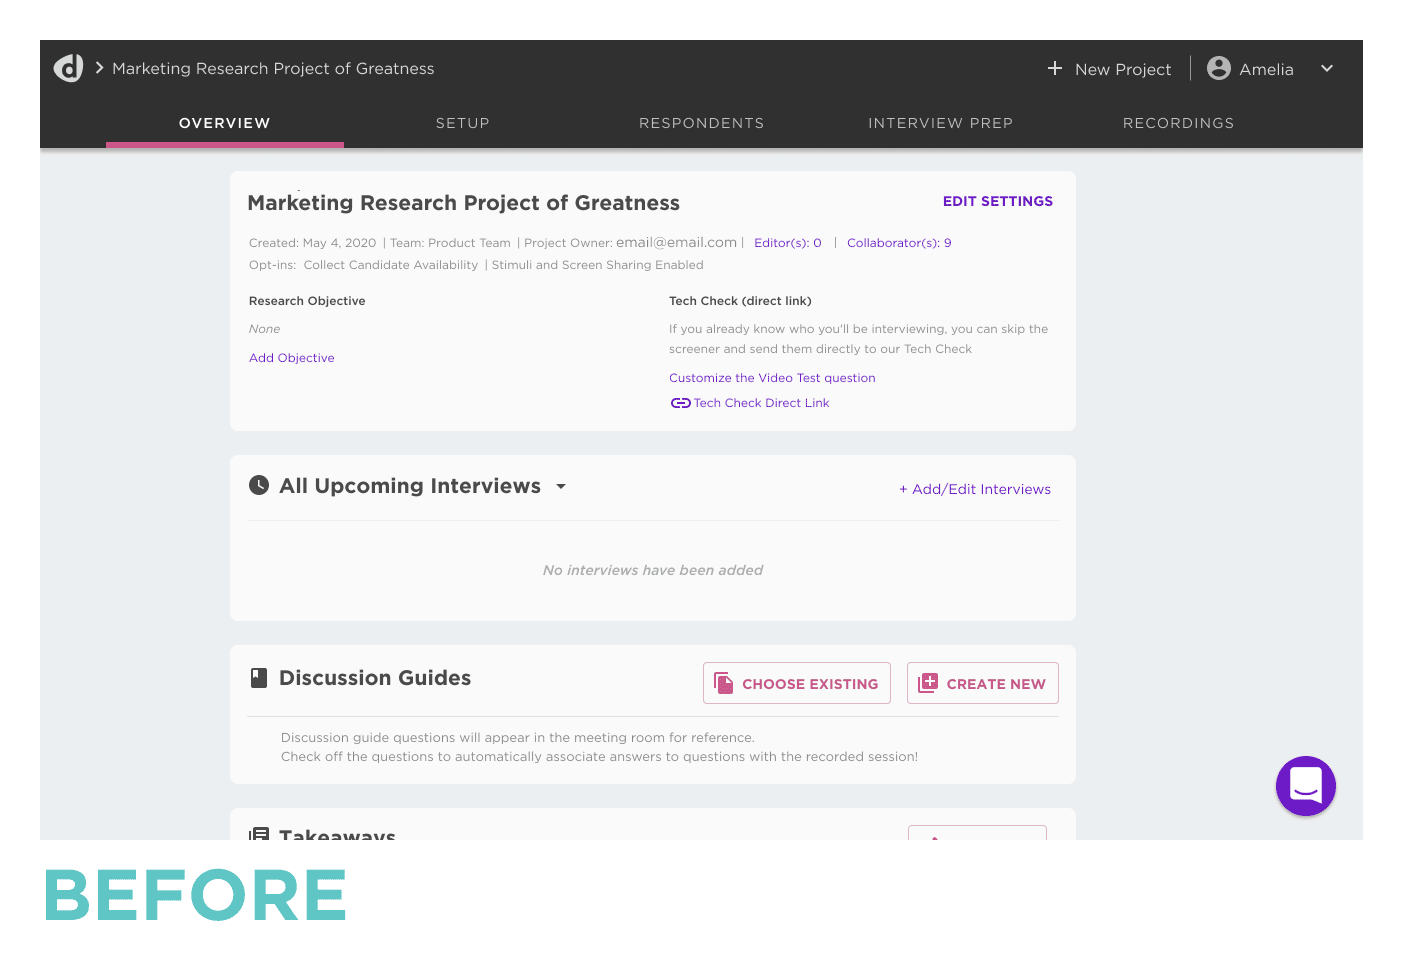 a before and after look at the project overview page with redesigned layout